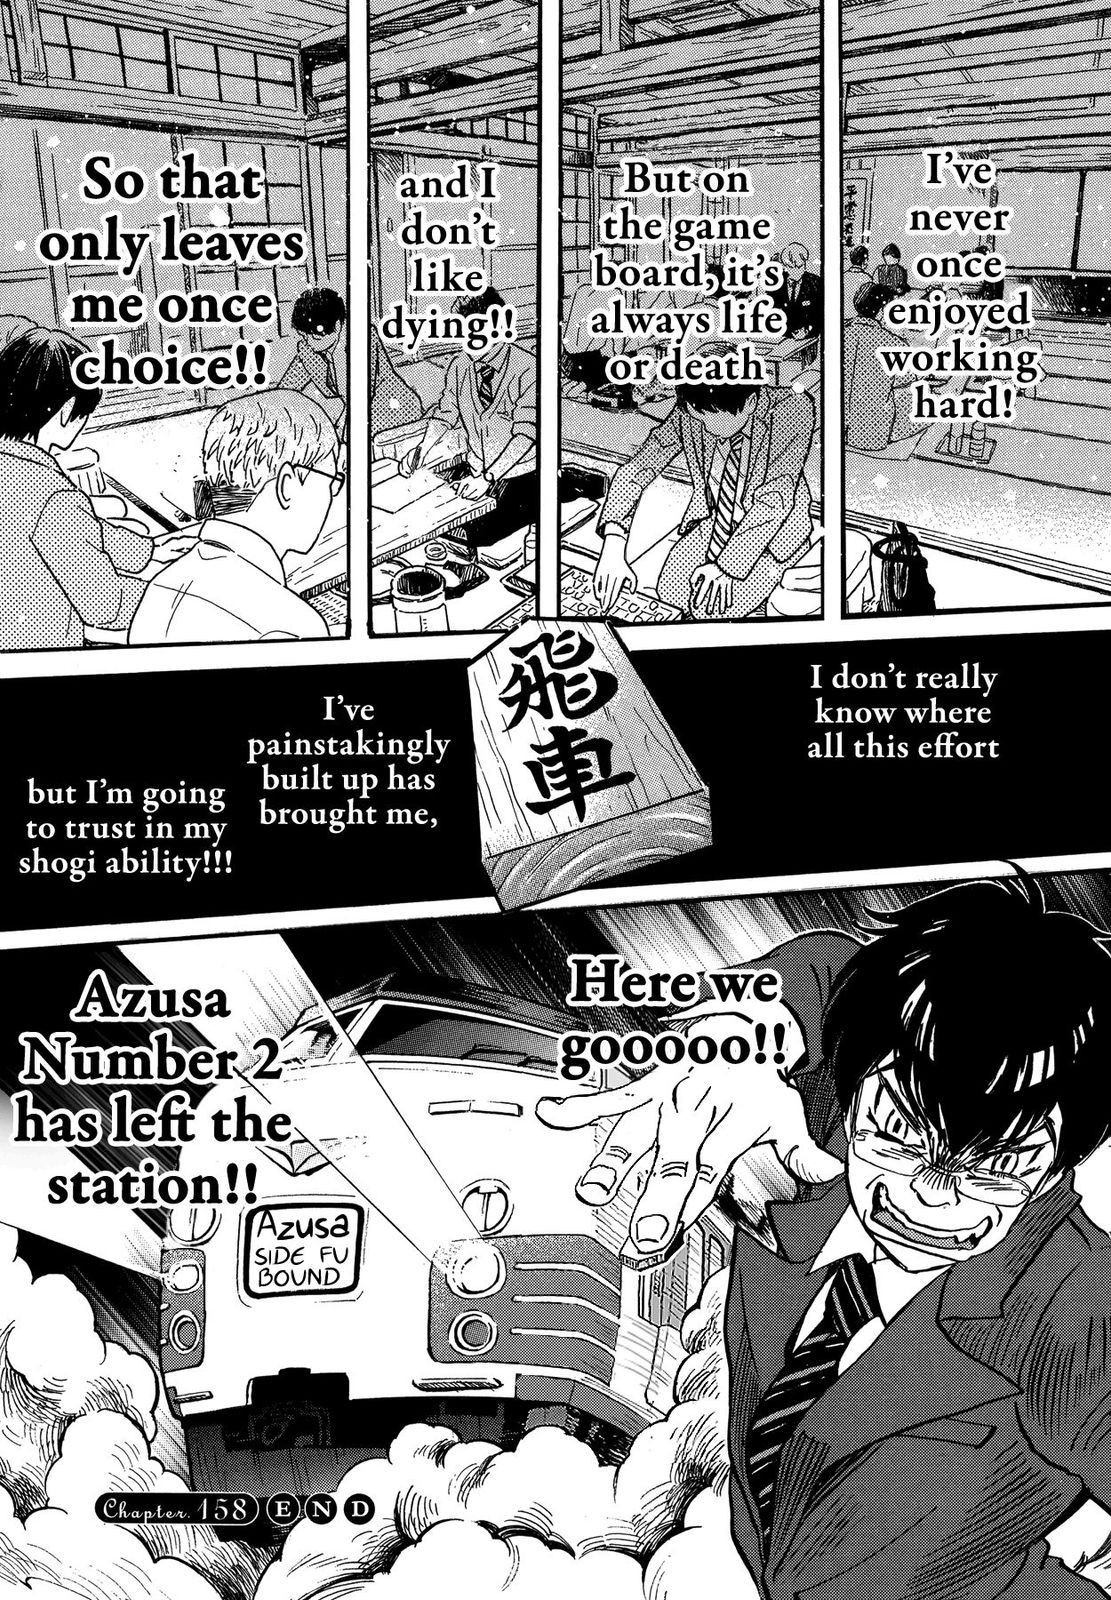 March Comes in Like a Lion, Chapter 158 Azusa Number 1 (Part 3) (EN) image 12